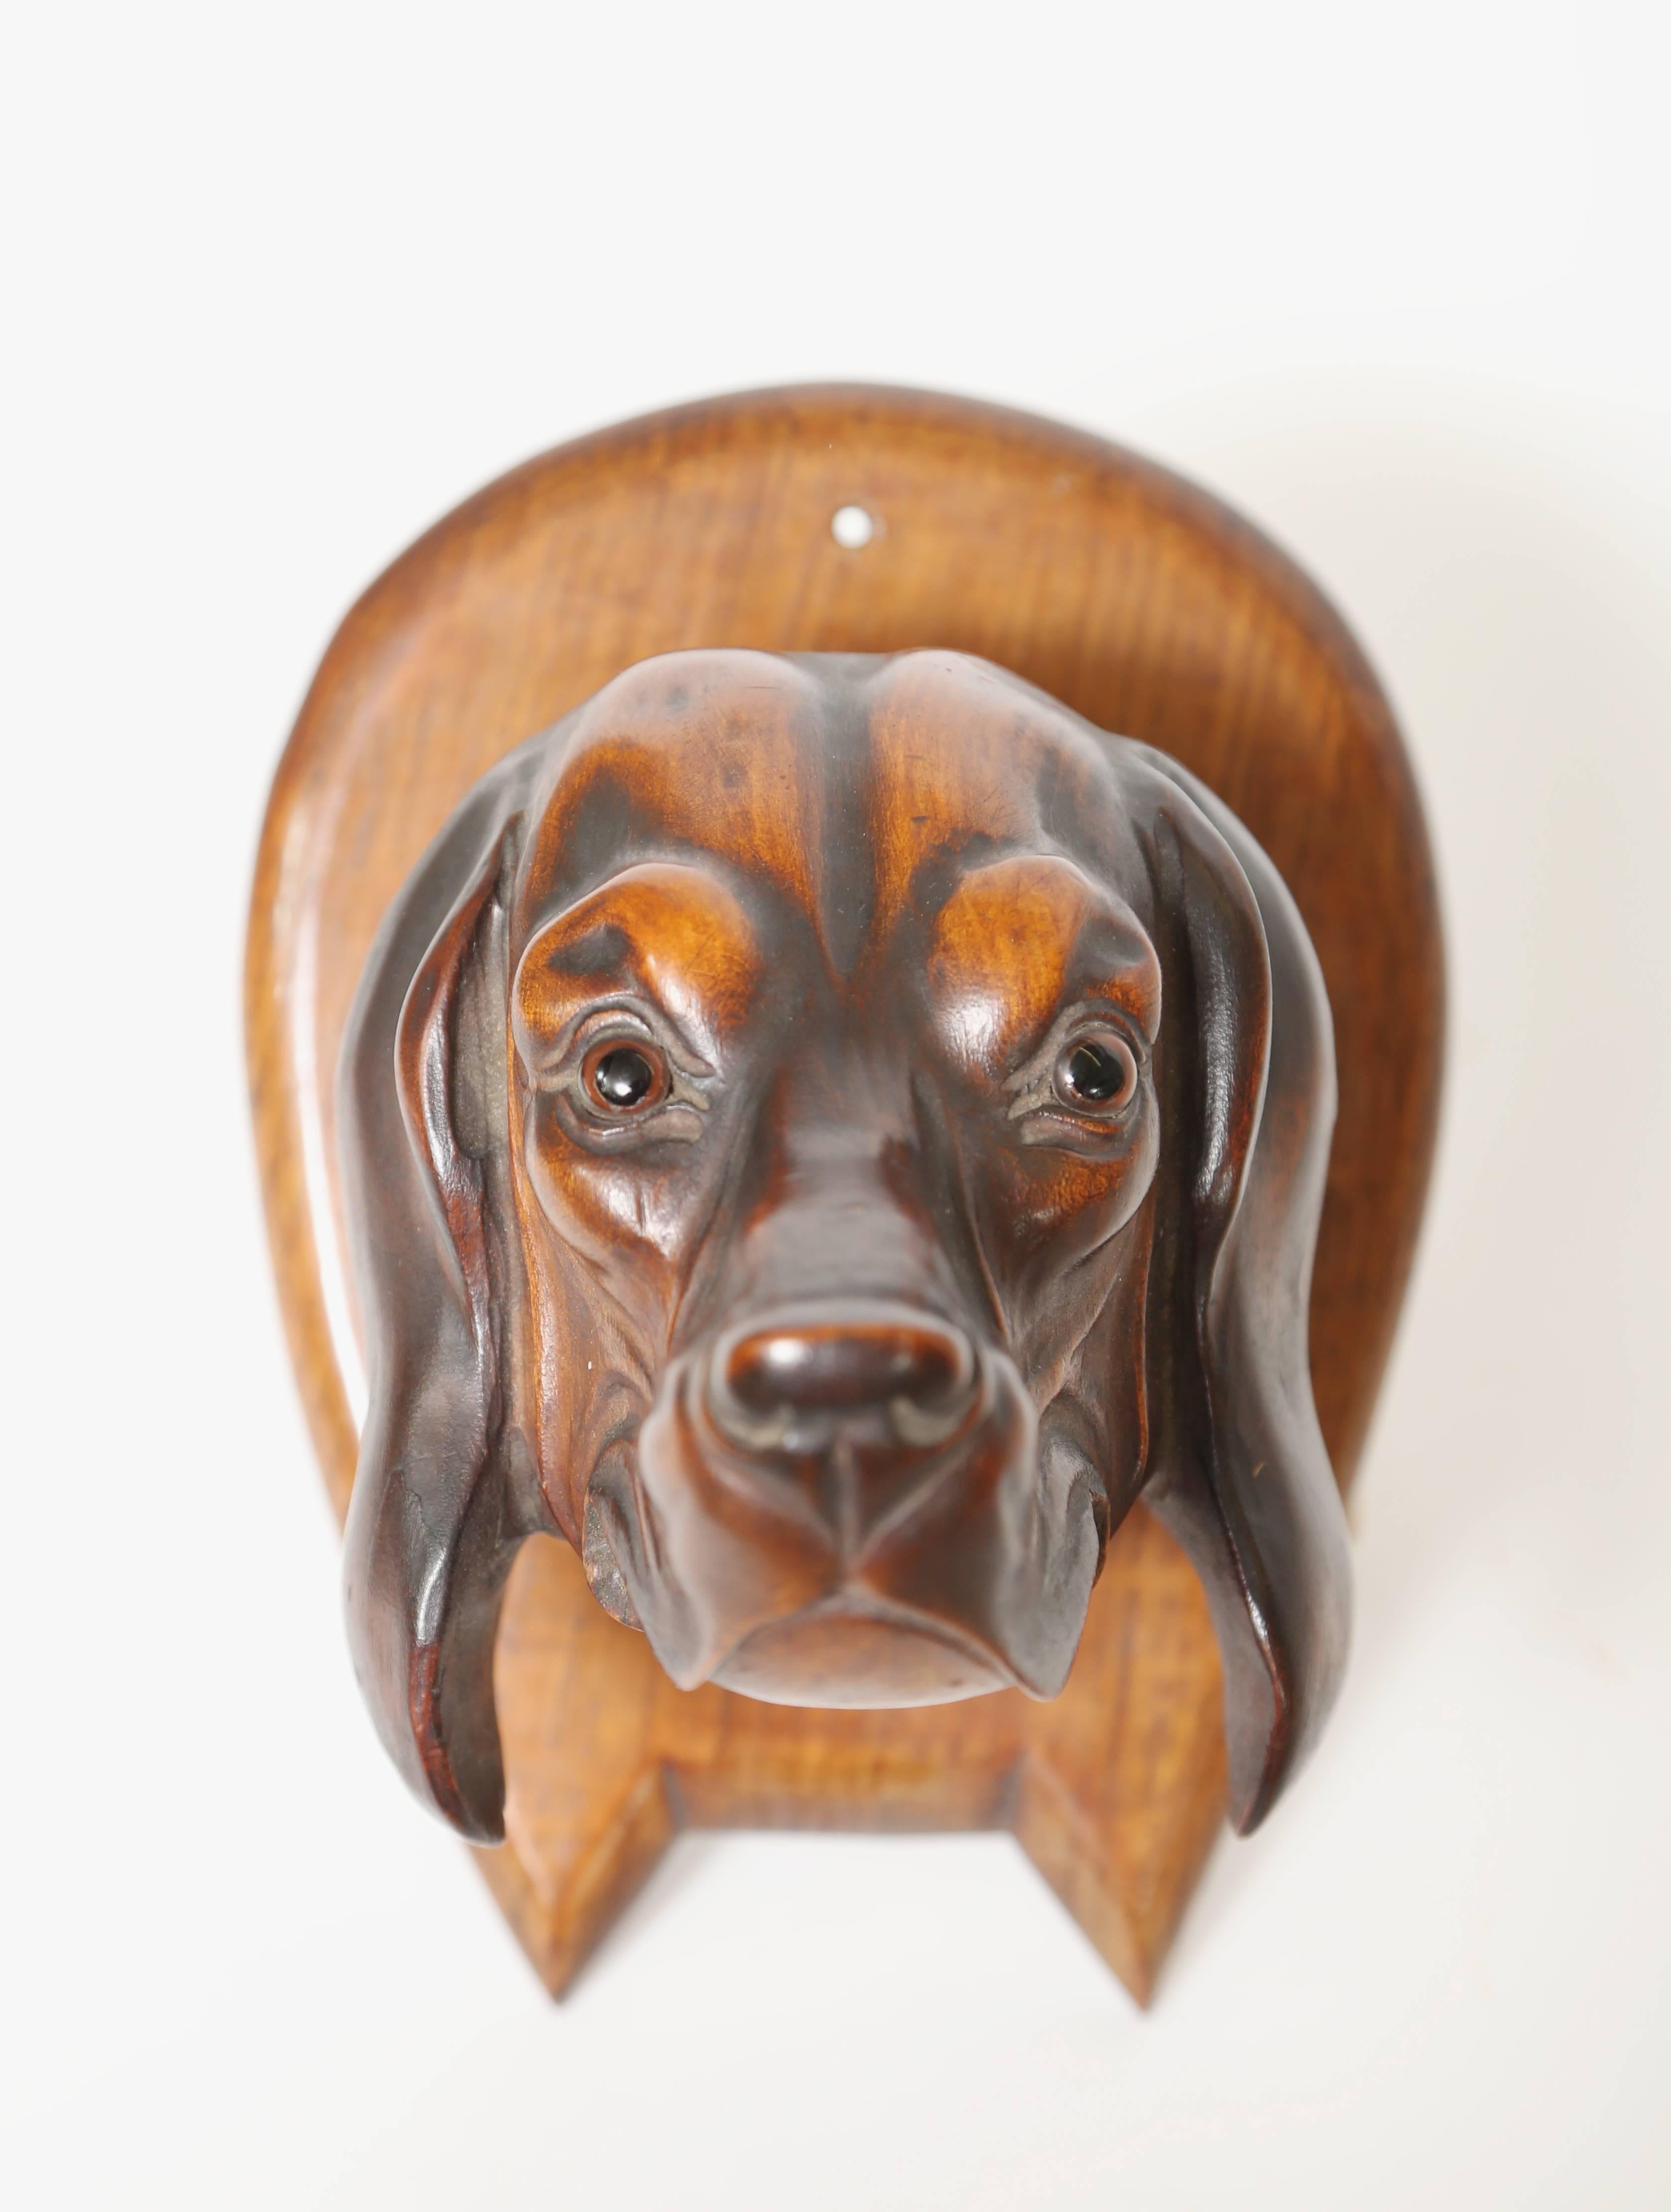 Riding crop holder in the form of a  hand carved  hunting dog's head with glass eyes.  The realistic carving is  mounted on a horse shoe shaped plaque.

(This item is eligible for a gift box).